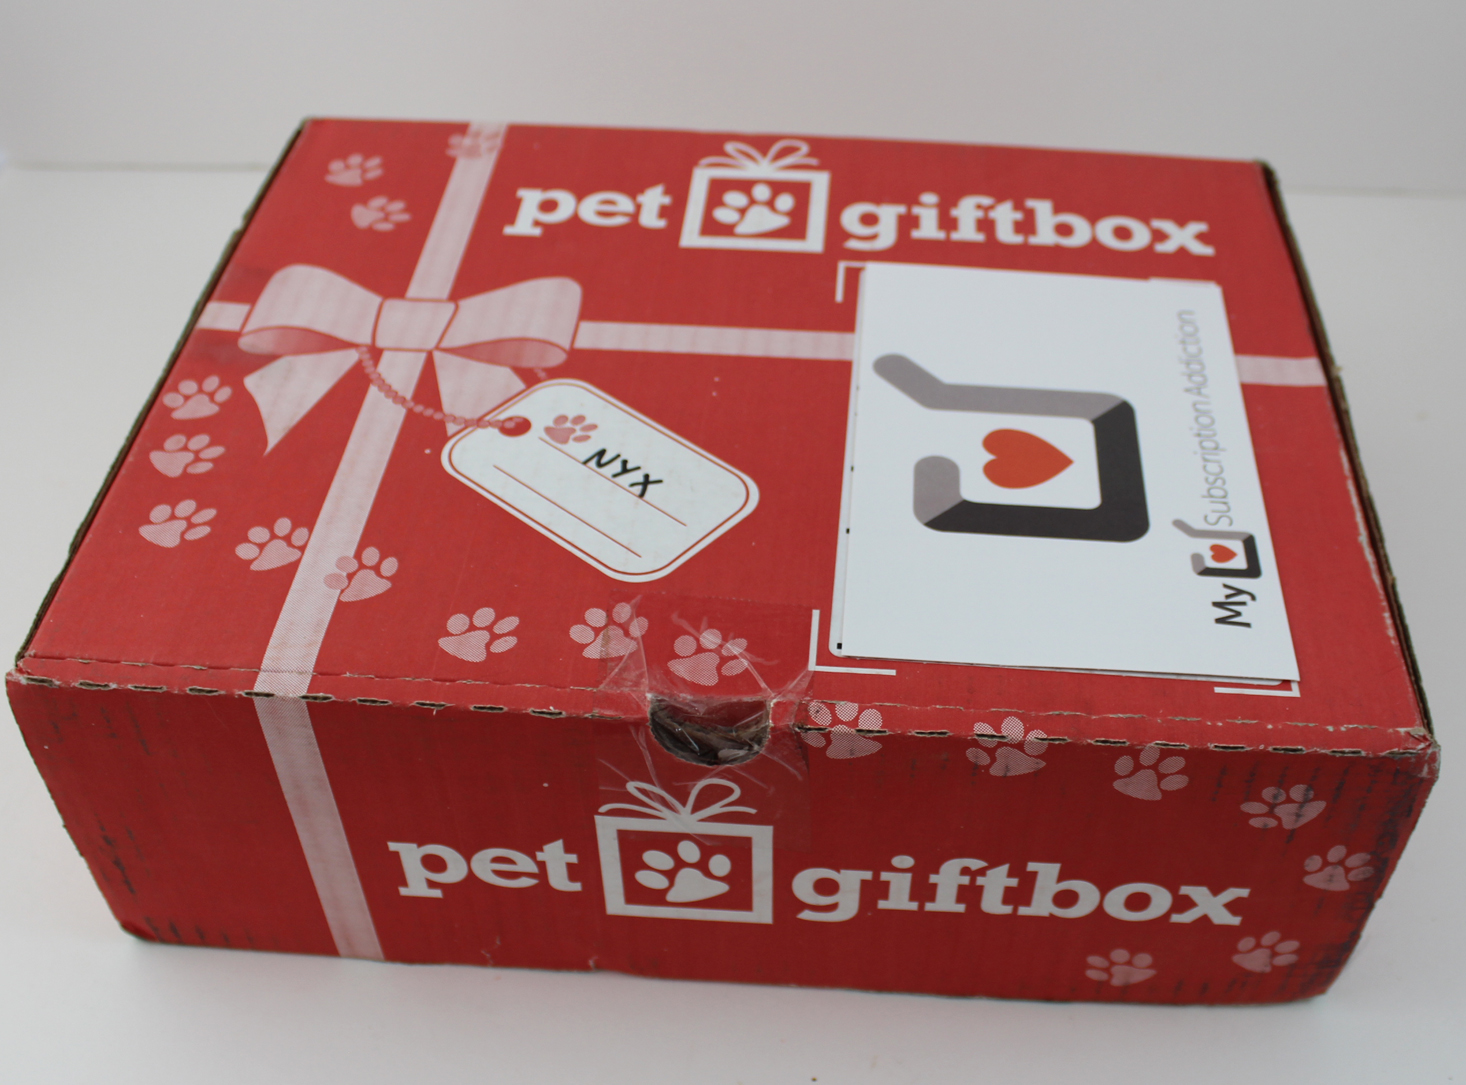 Pet GiftBox Dog Subscription Review + 50% Off Coupon – September 2017